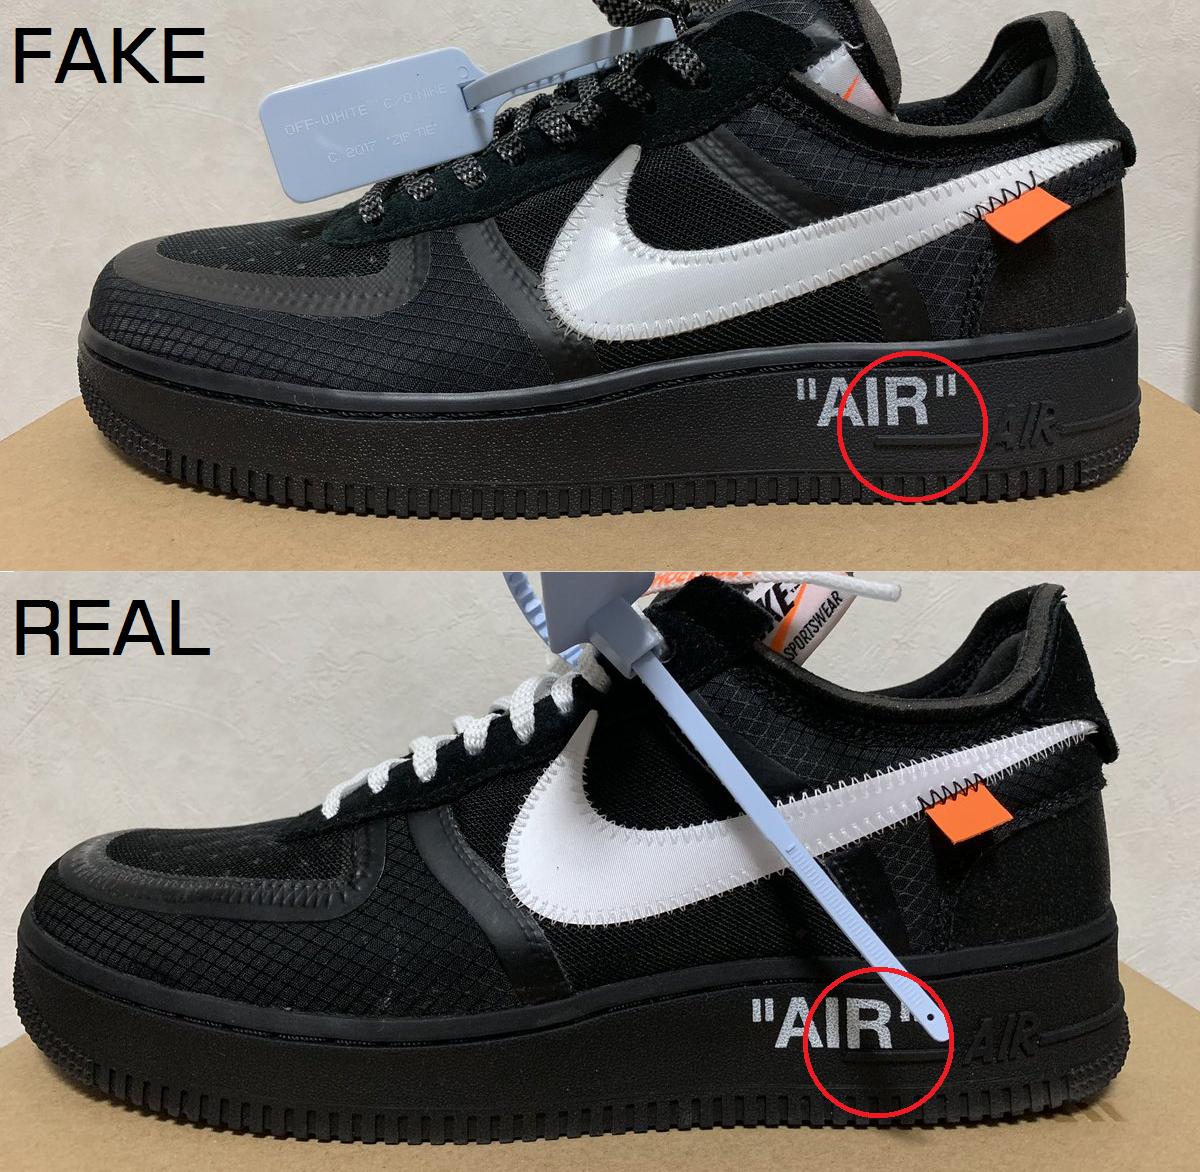 NIKE AIR FORCE 1 LOW &quot;OFF WHITE&quot; FAKE vs REAL | RING KNOWS RING